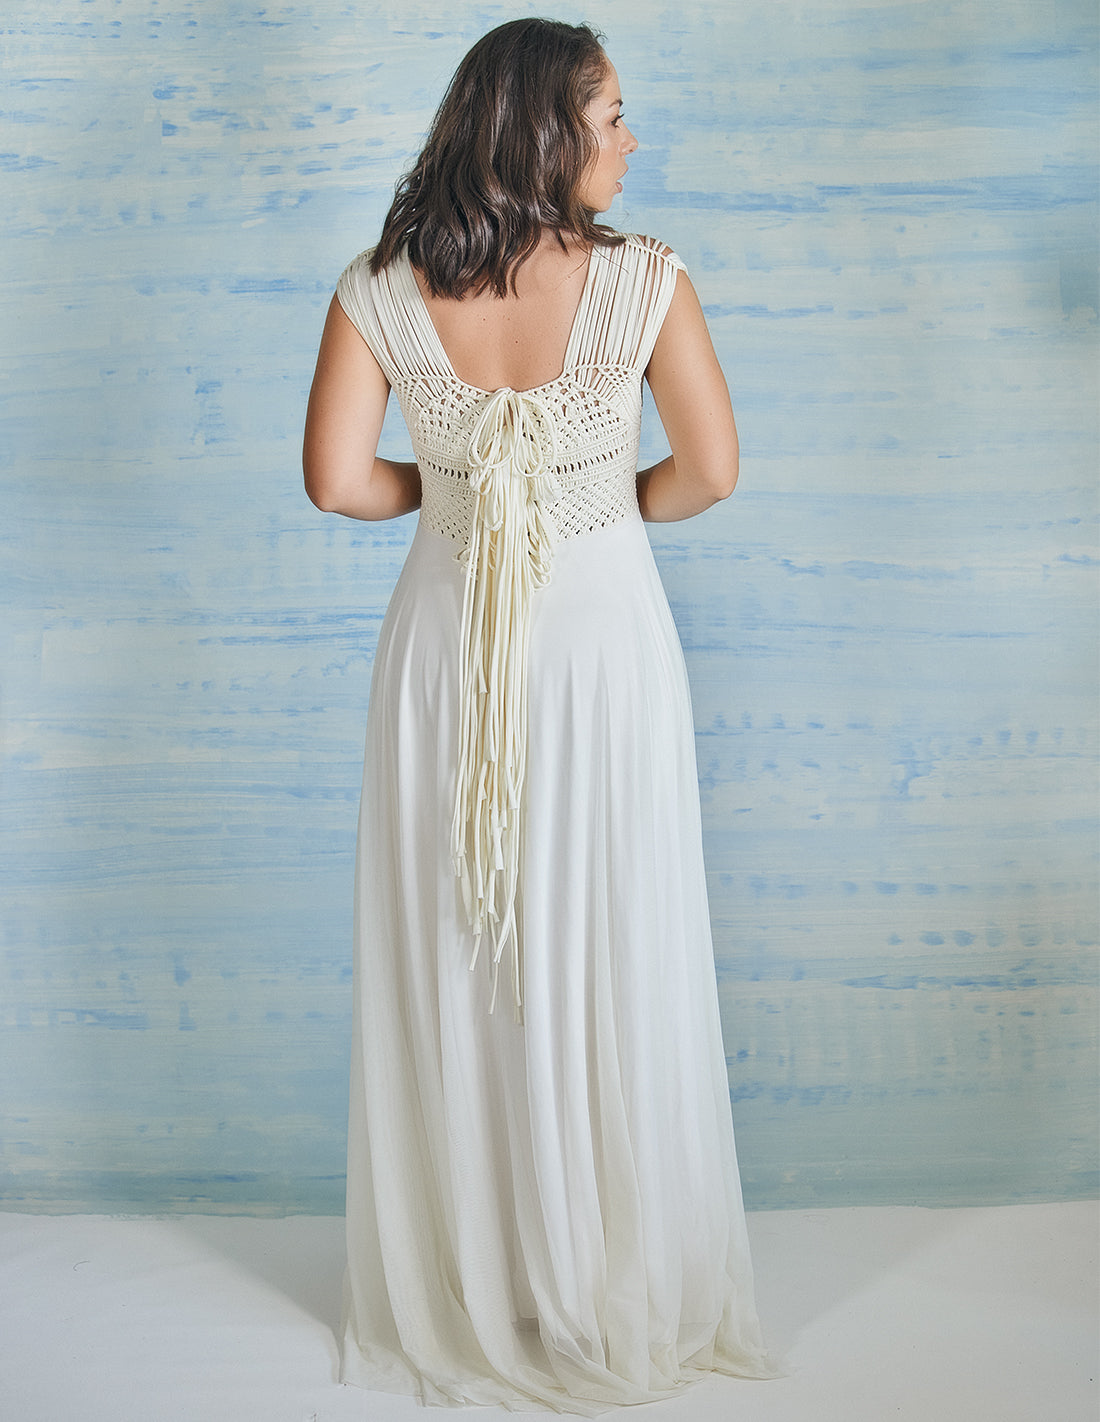 Papirus Dress Ivory. Dress With Hand Woven Macramé In Ivory. Entreaguas